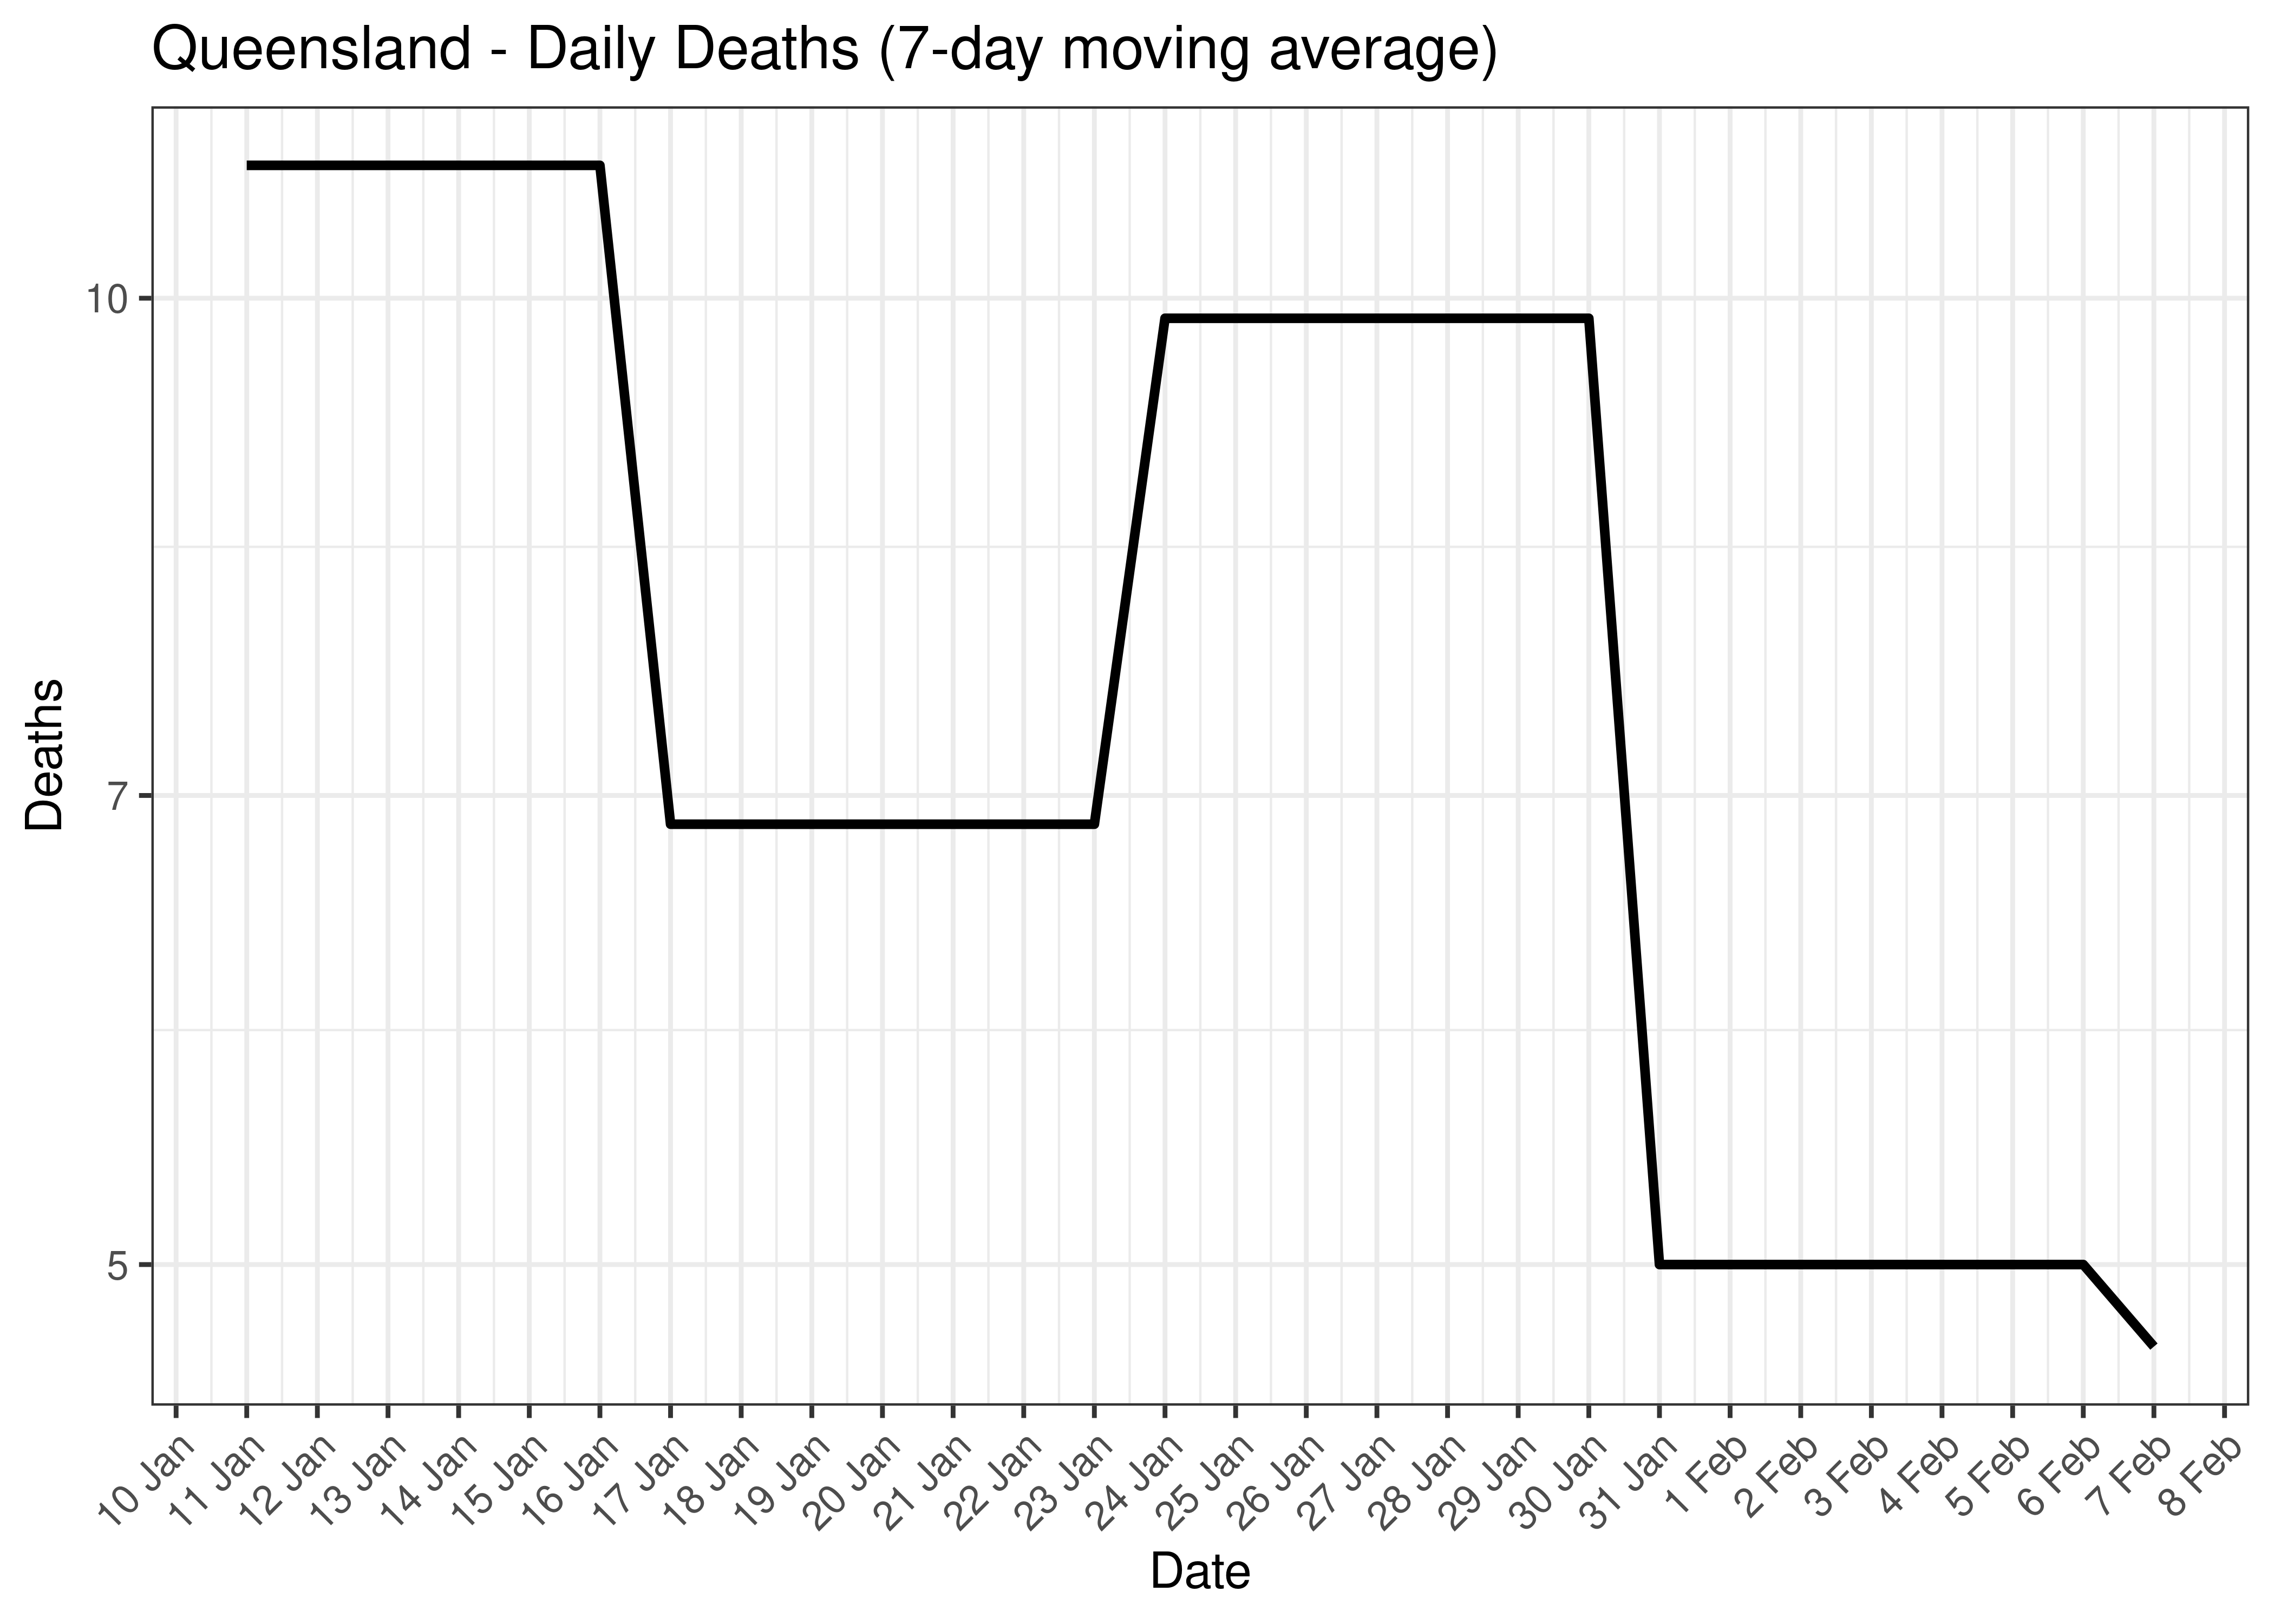 Queensland - Daily Deaths for Last 30-days (7-day moving average)